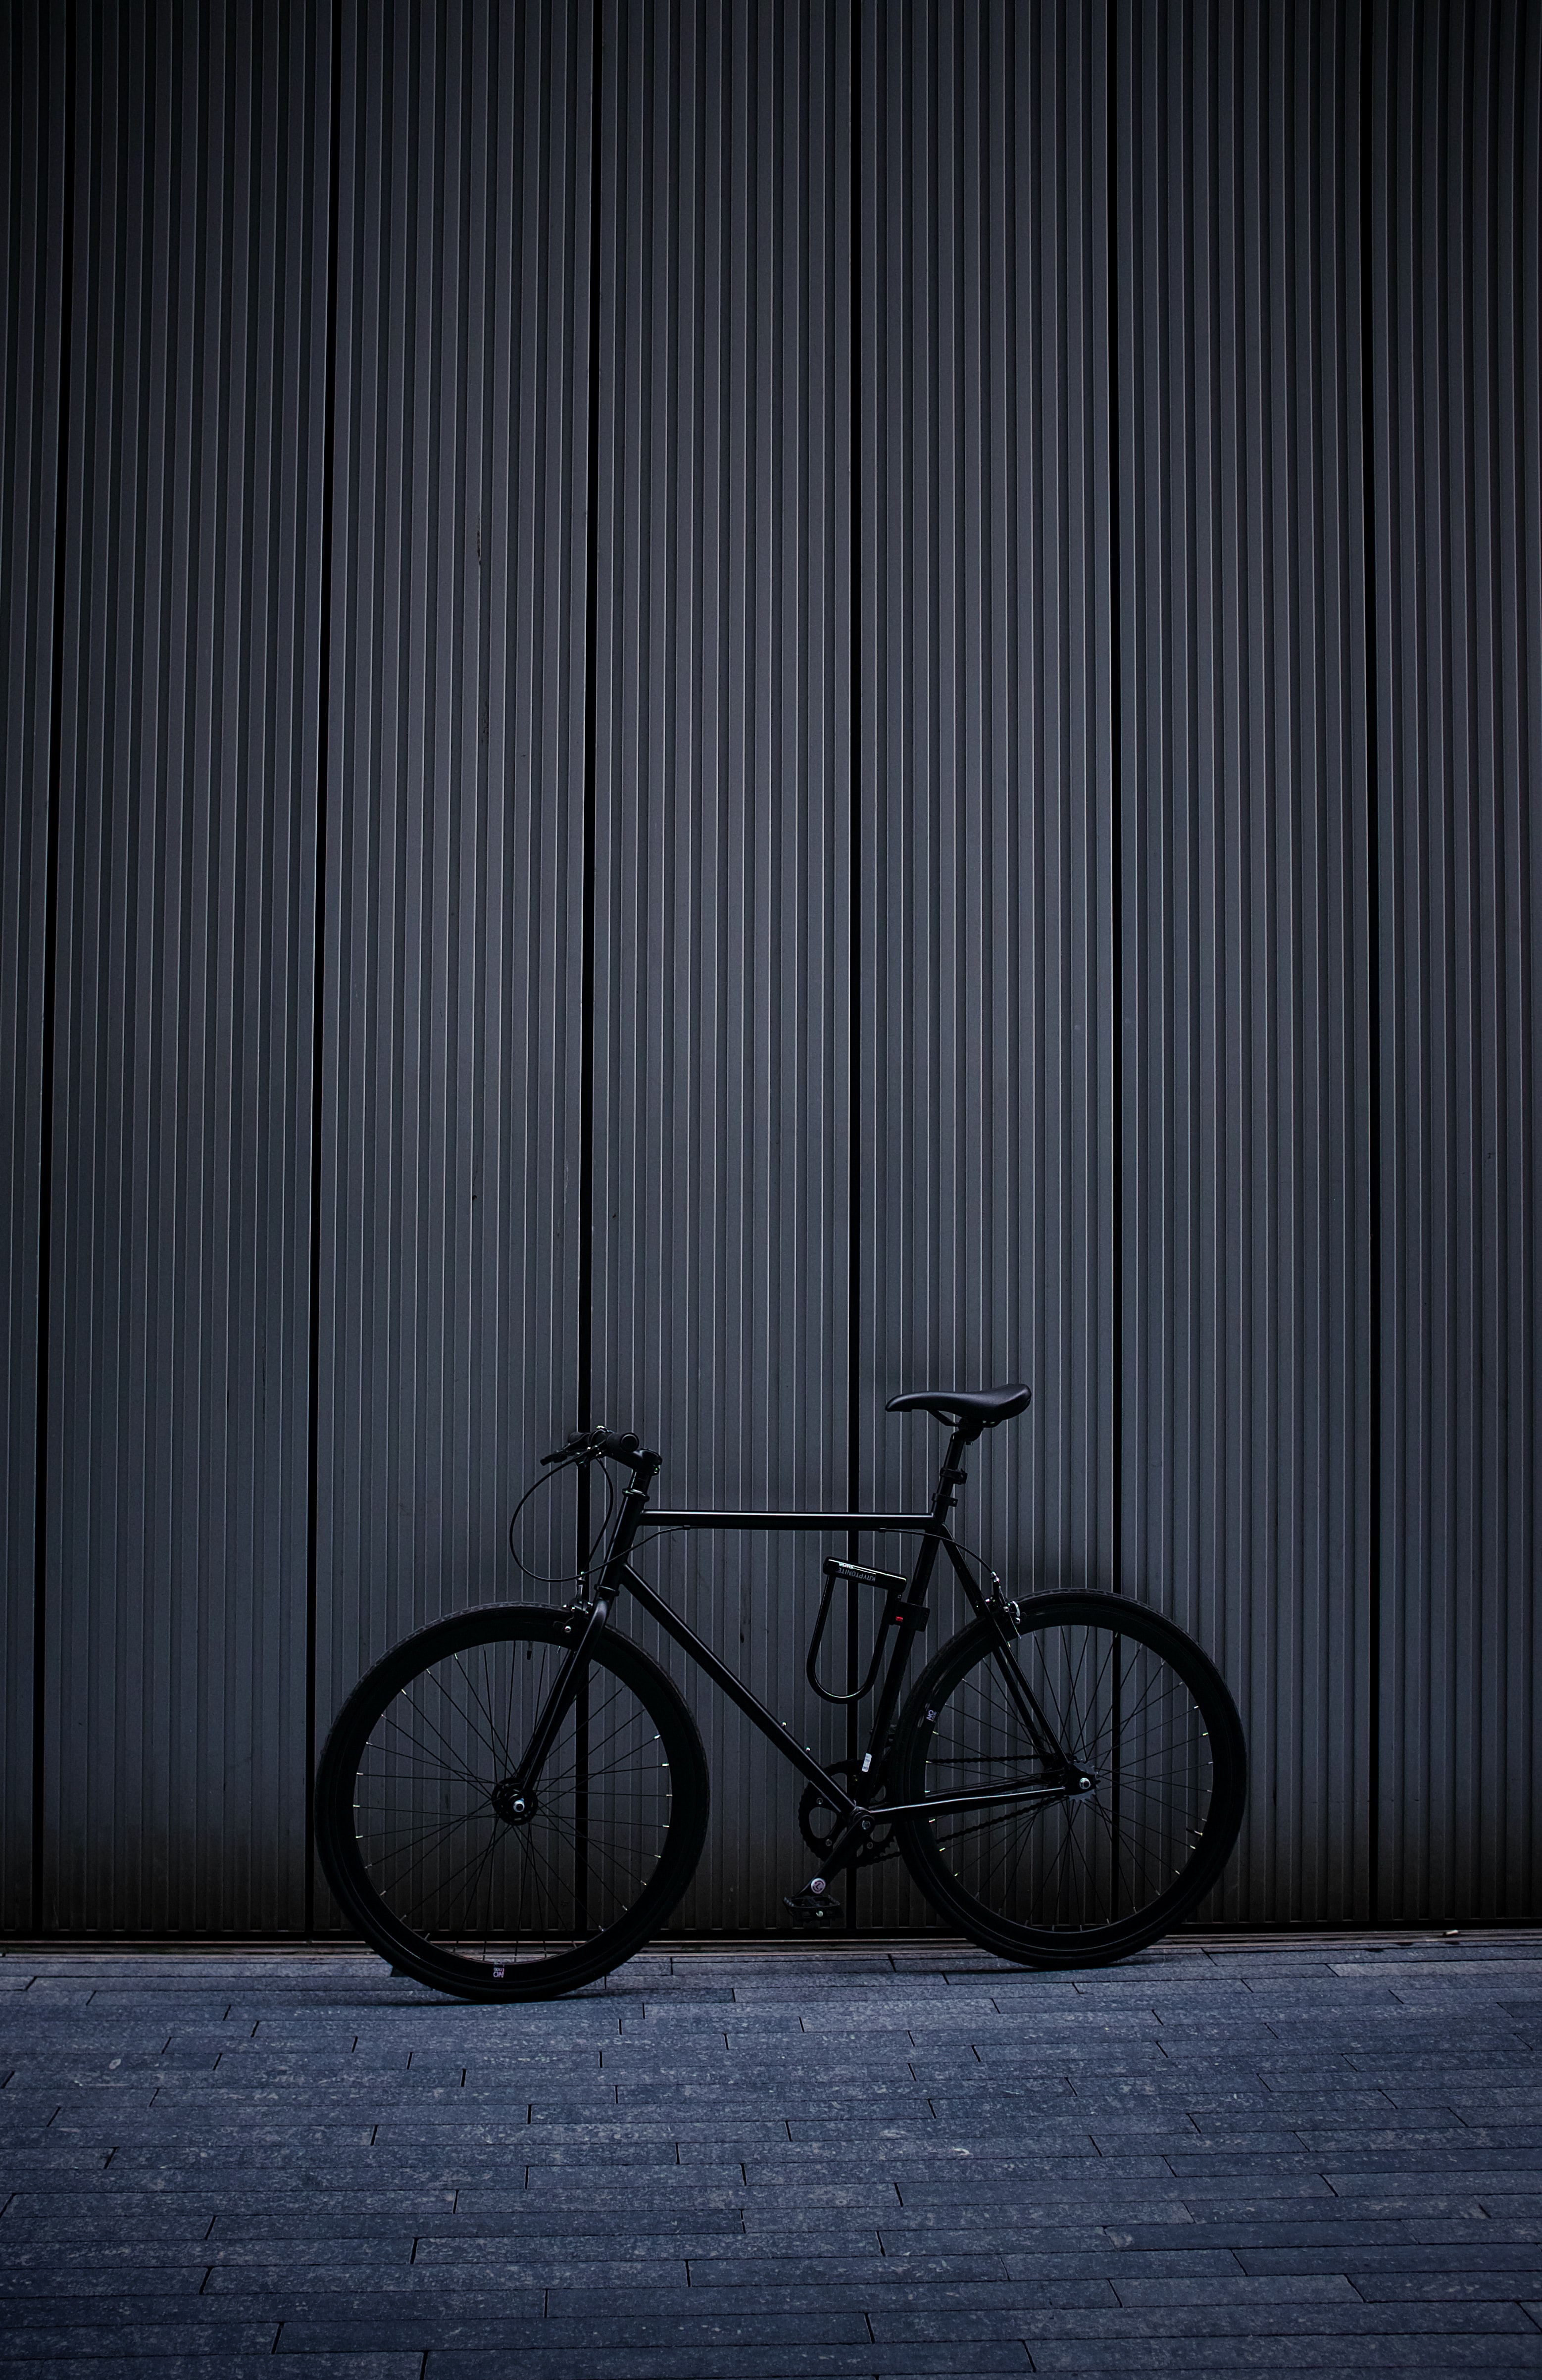 Popular Bicycle Image for Phone